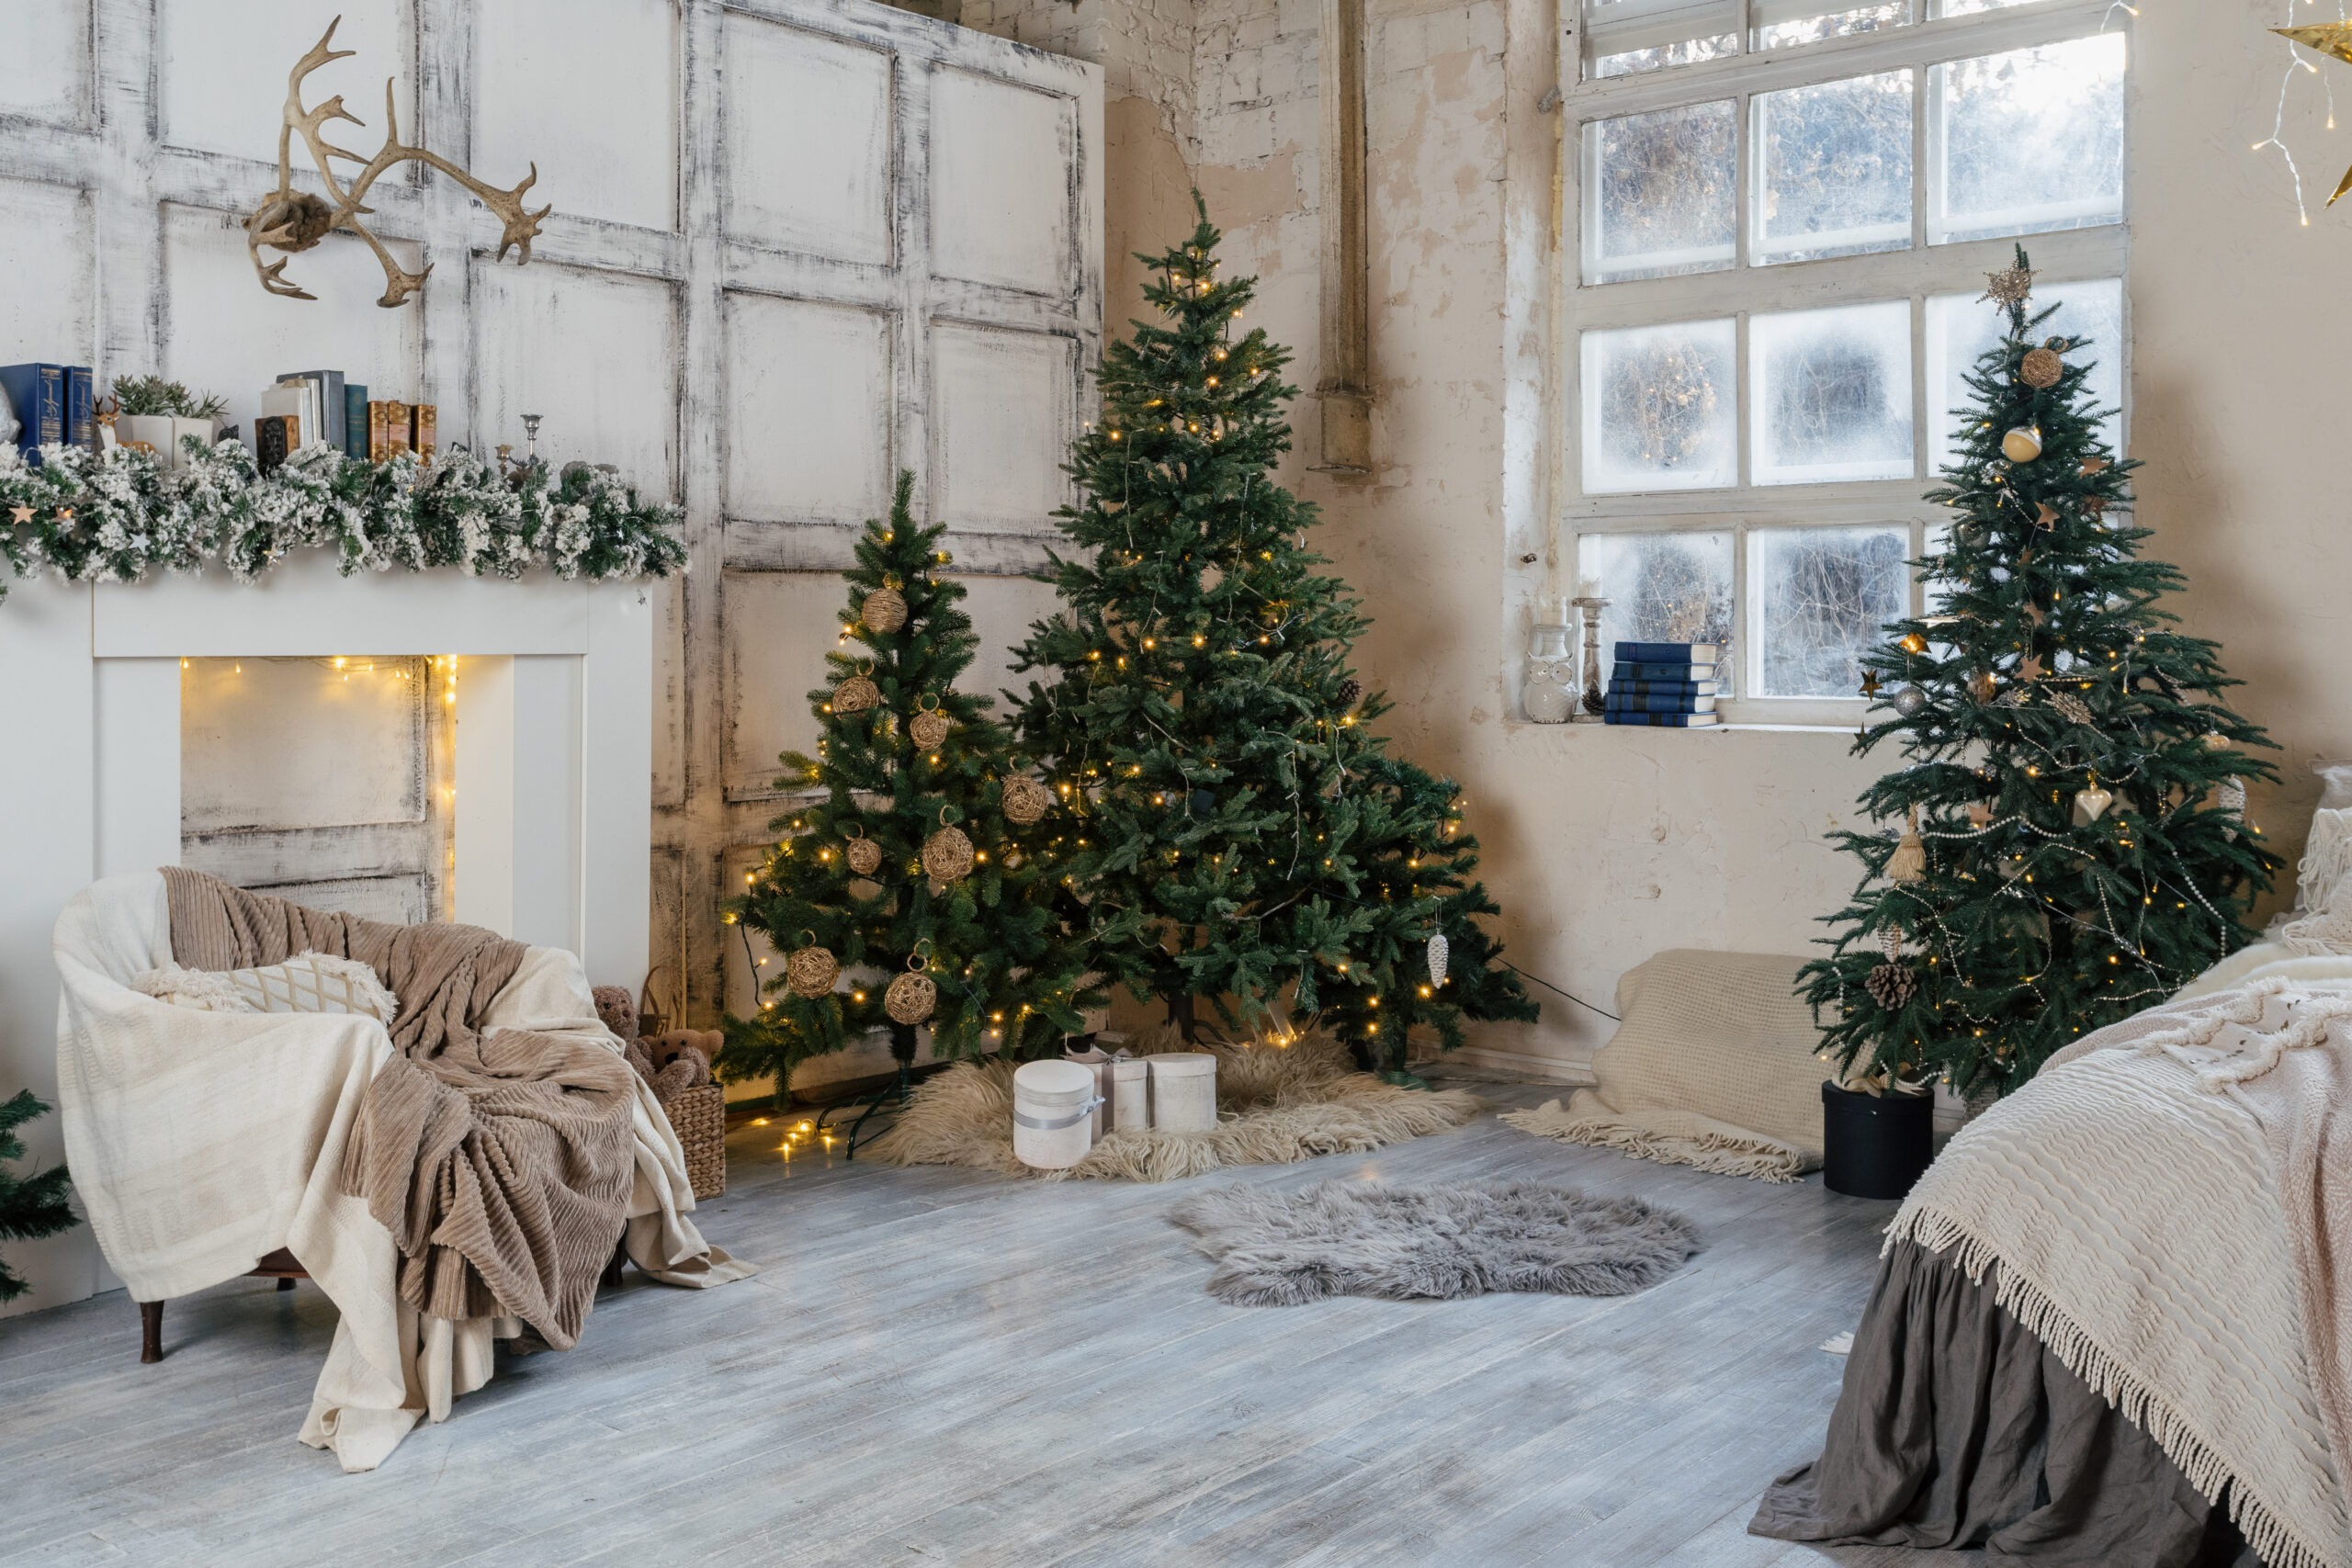 Cozy living room with white winter style interior, decorated new year tree, garland lights, comfort armchair, fireplace, present boxes and traditional noel decor at home